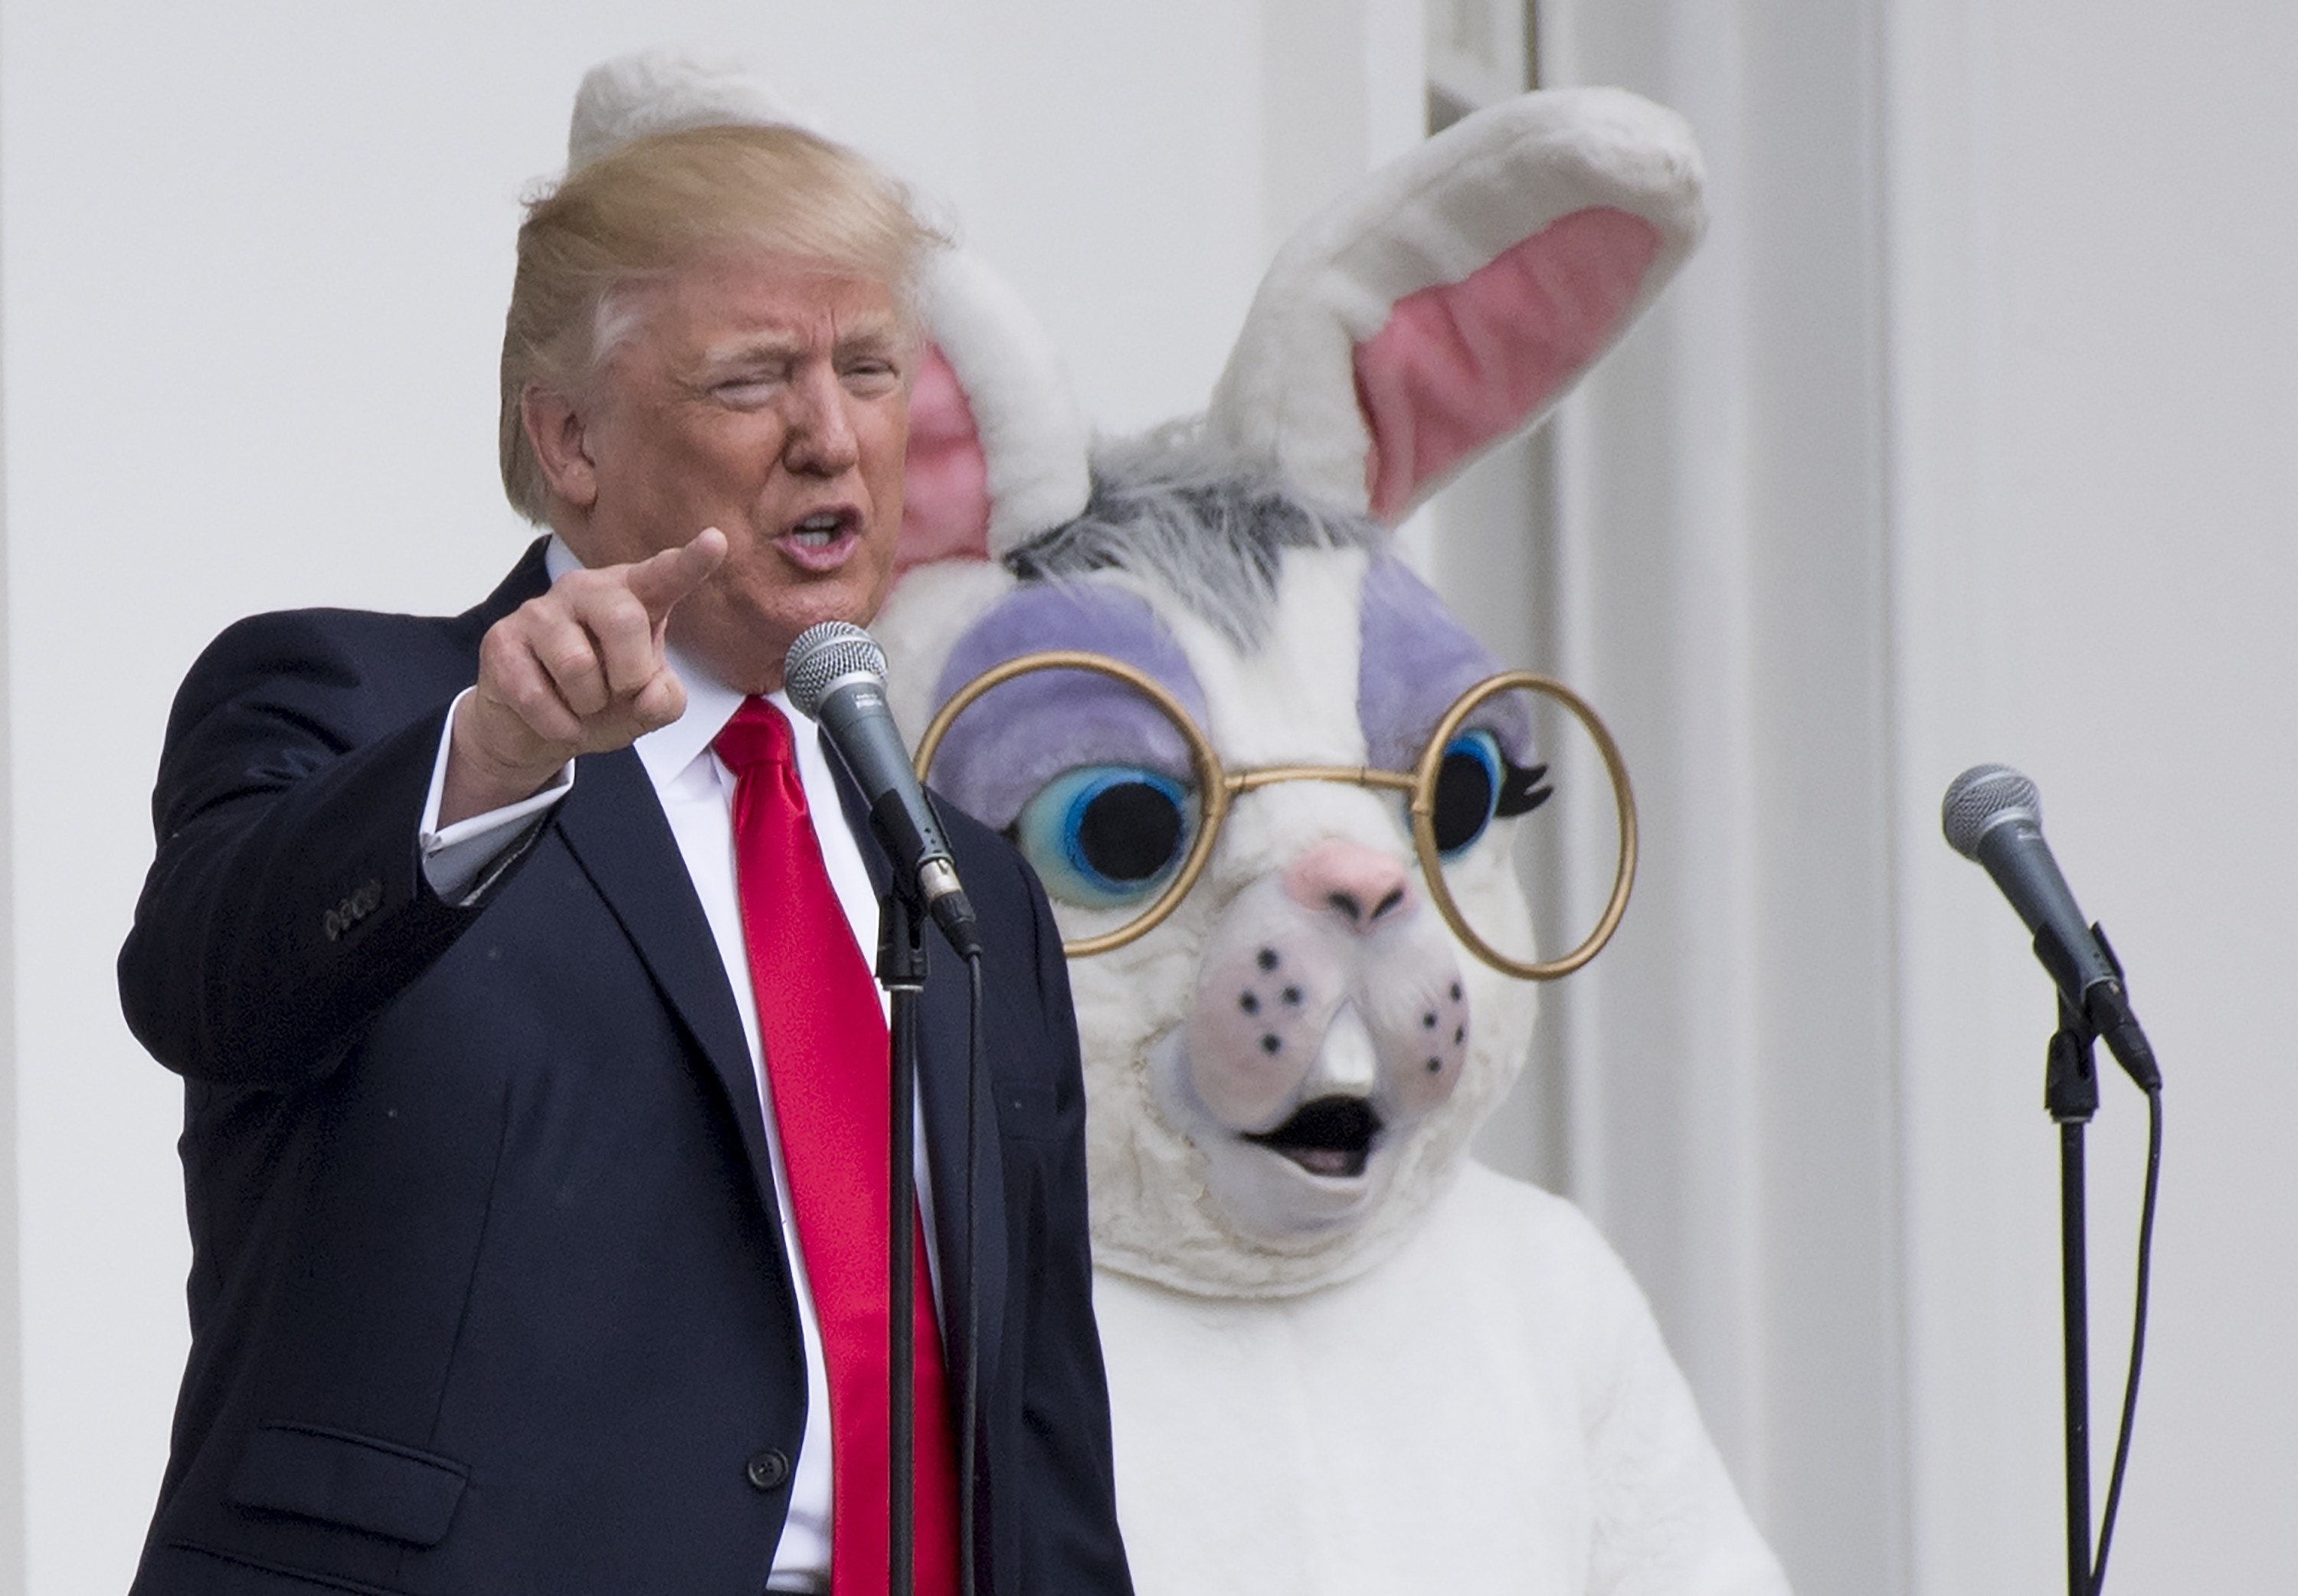 Trump points and speaks as the shocked Easter bunny looks on